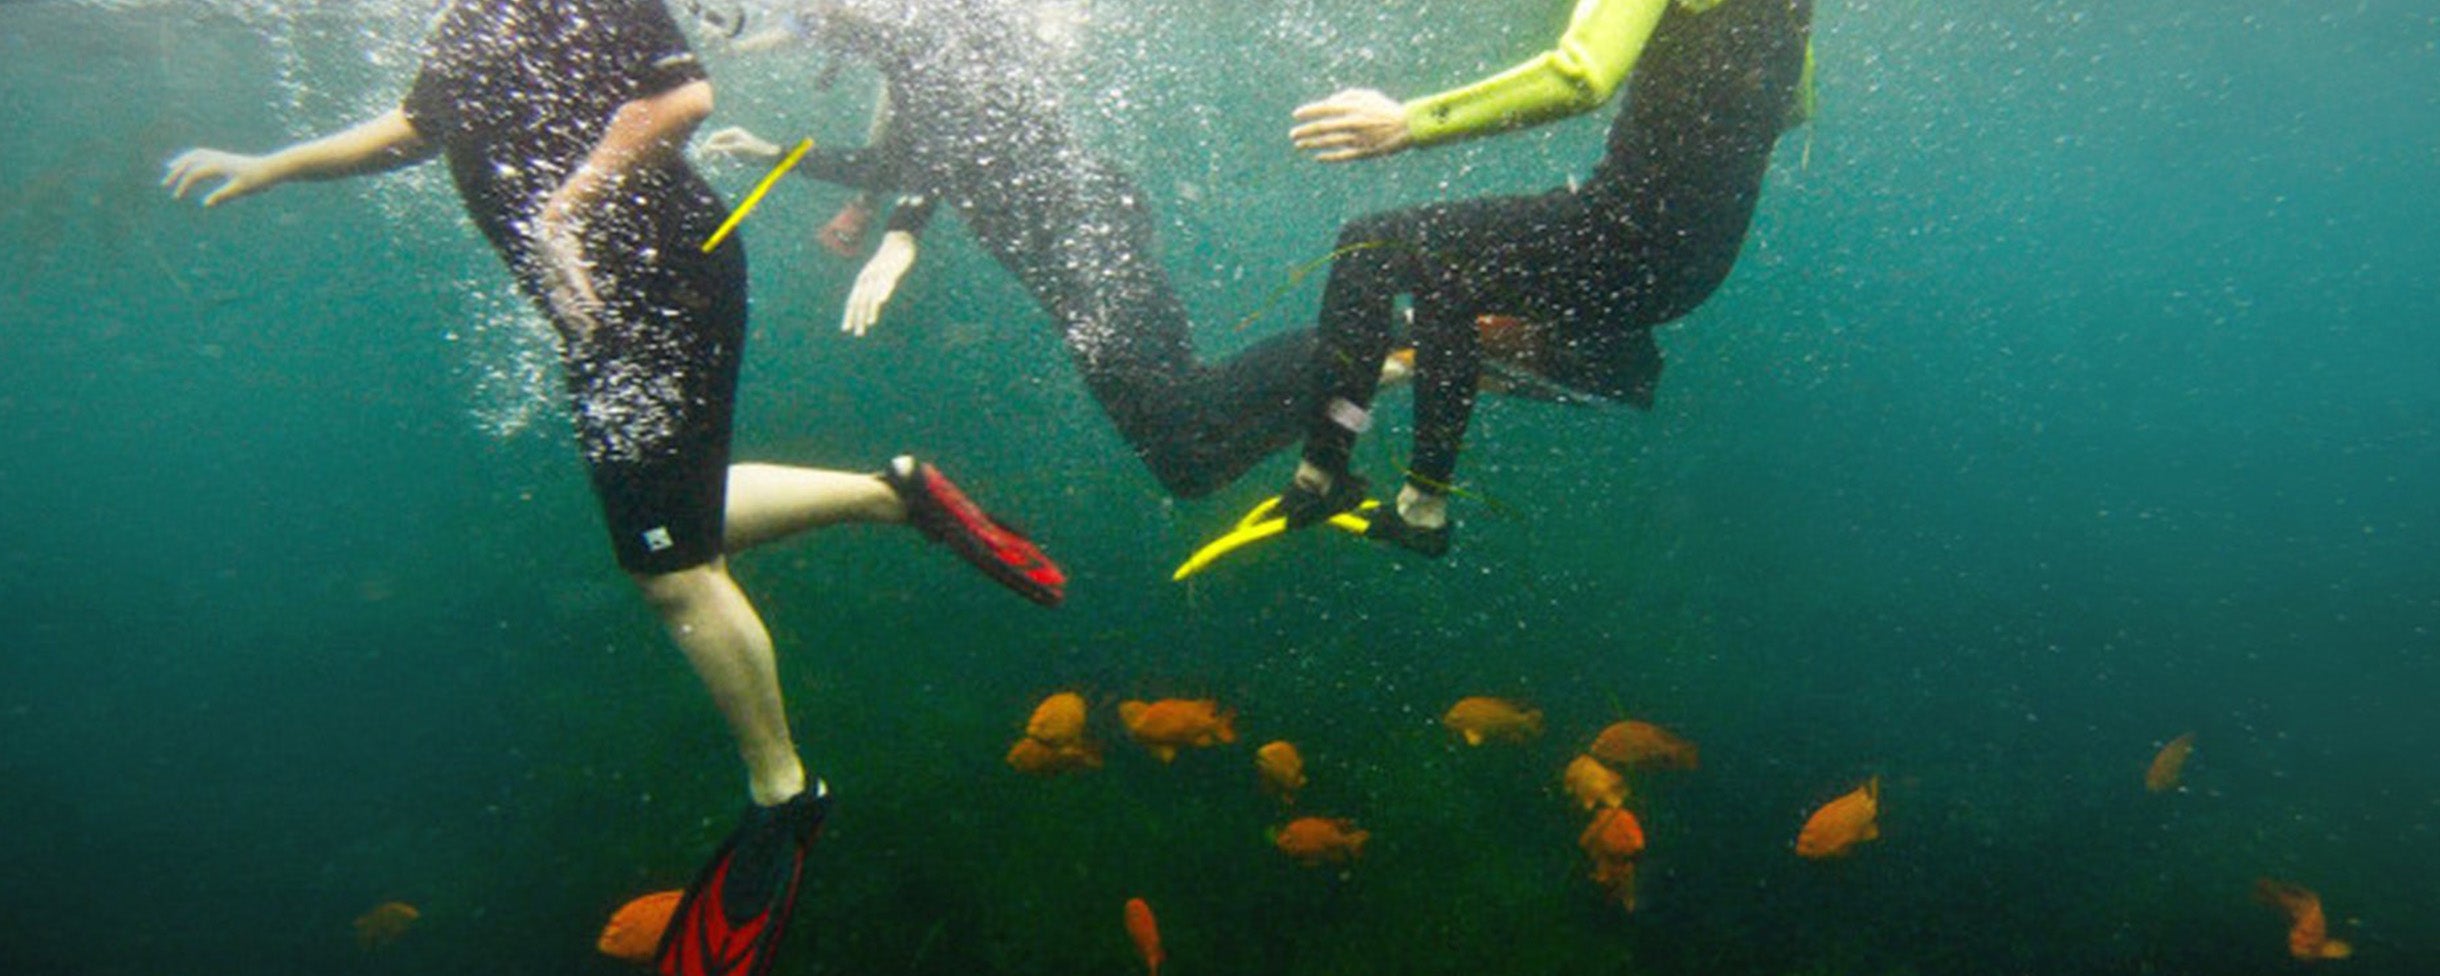 3 snorkelers on a Snorkel Tour with Everyday California swimming with fish in the Pacific Ocean. 